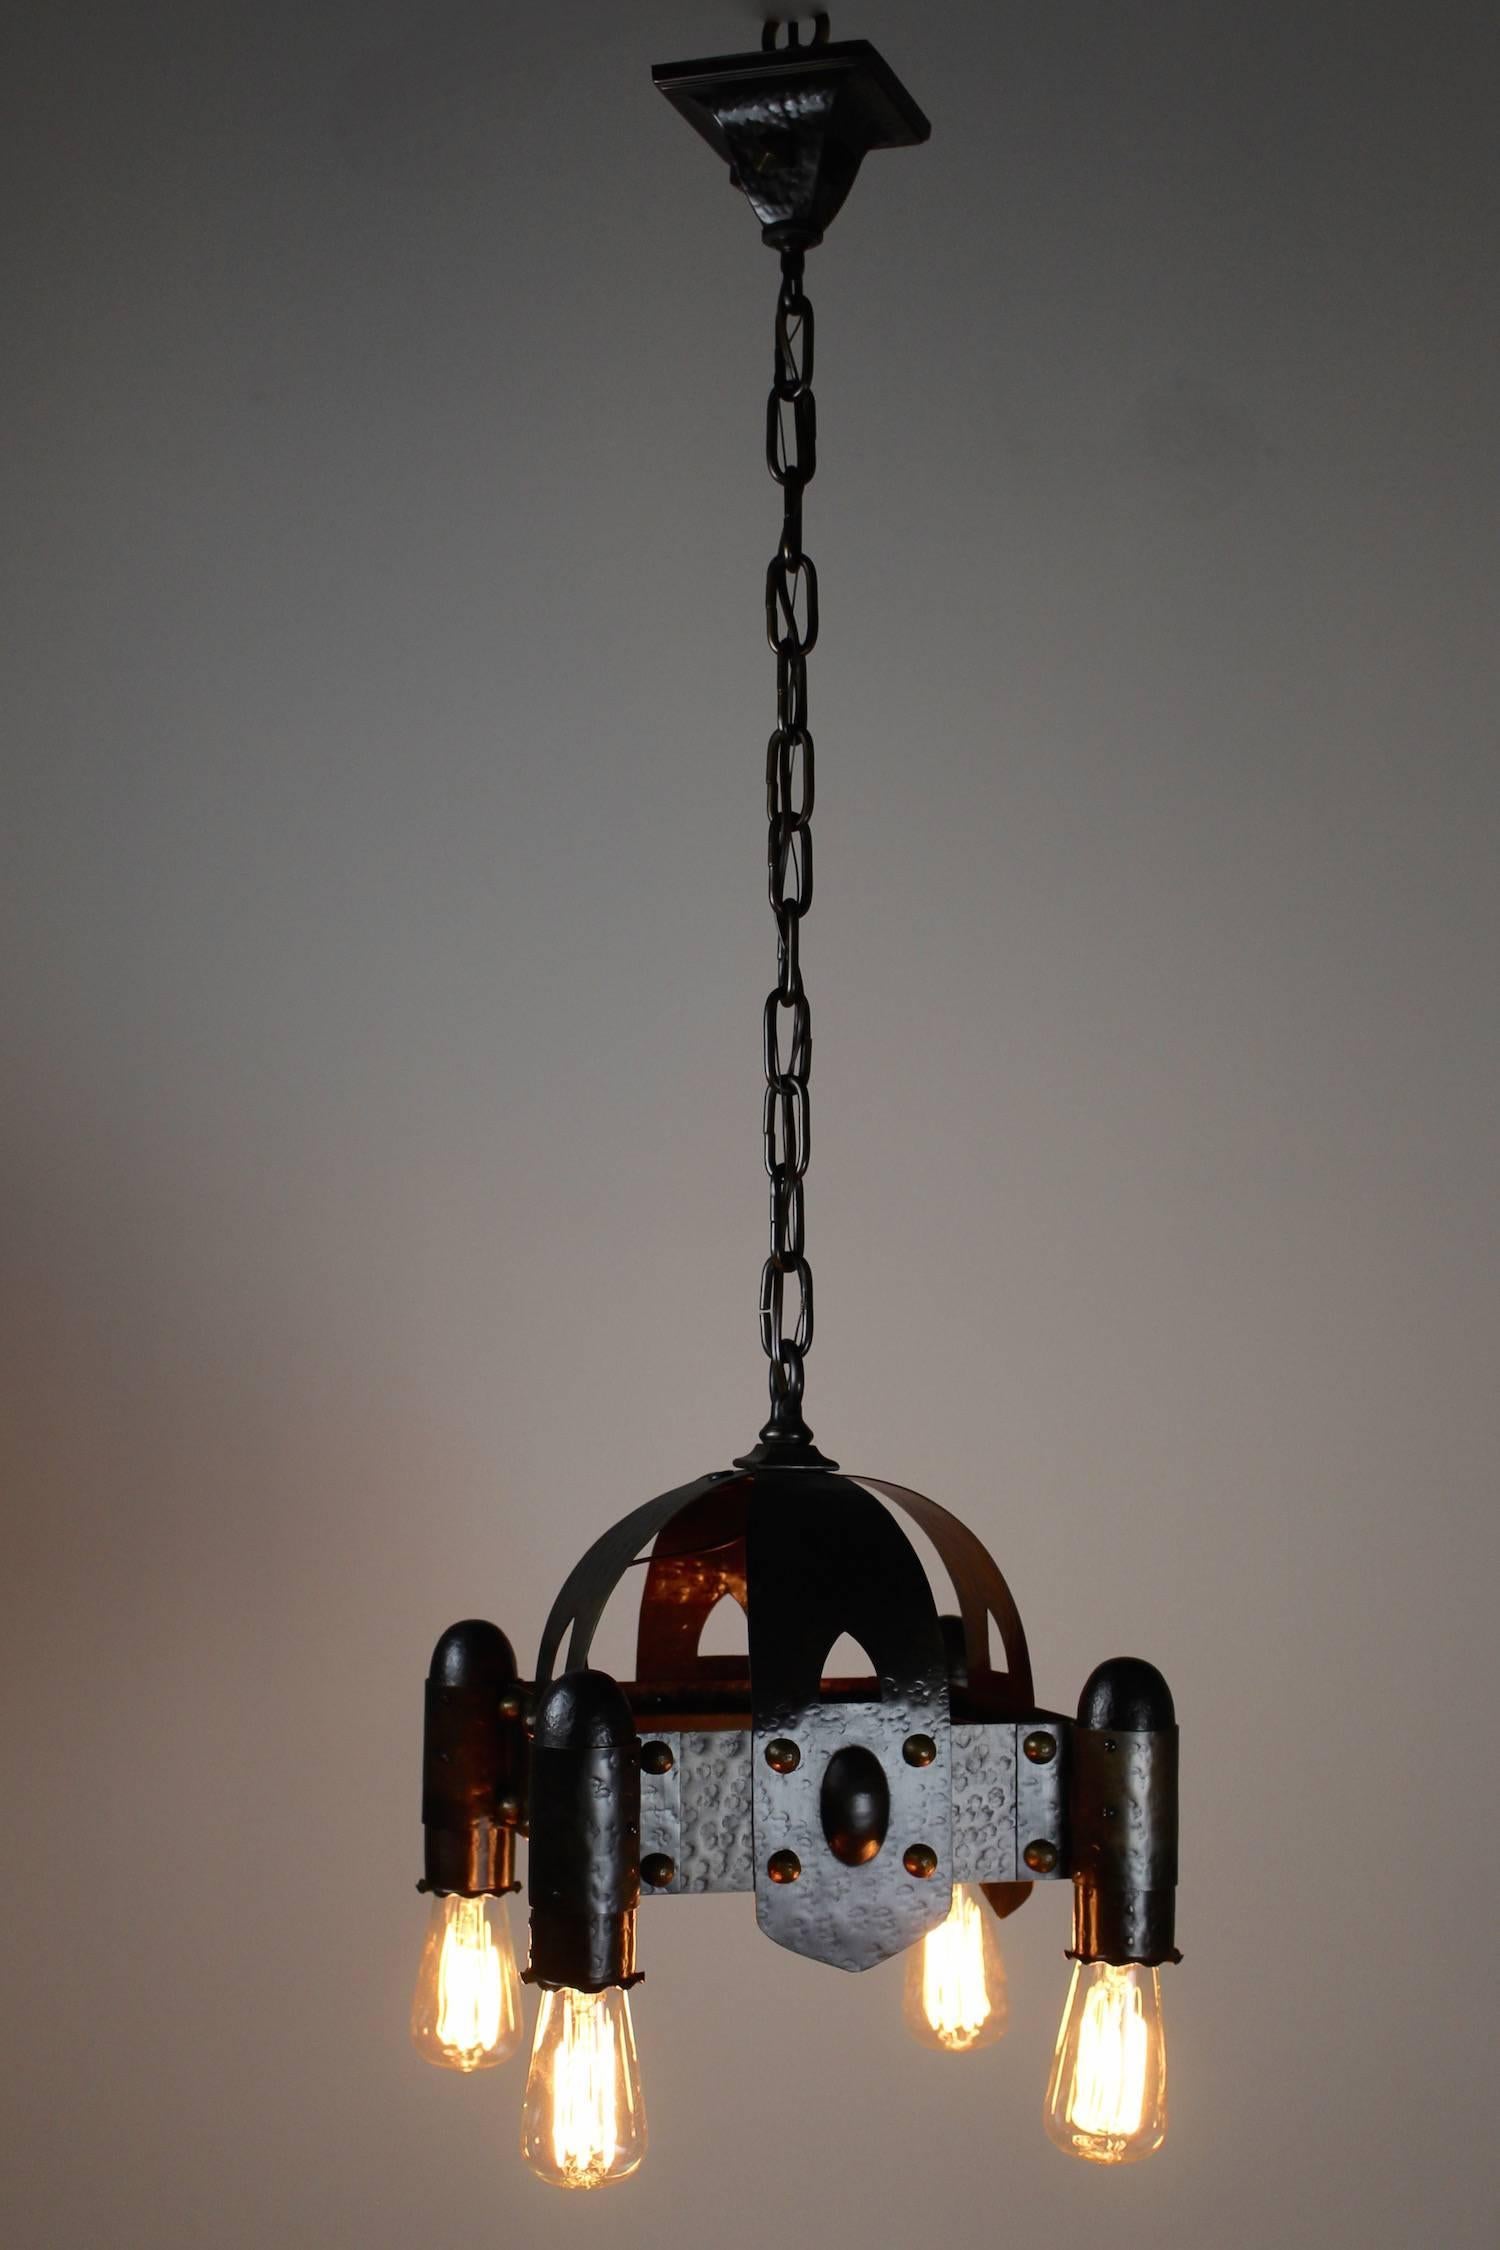 Circa 1912 Hammered Brass Arts & Crafts fixture. Hand hammered and nice 'stud' detail. This light was sourced from a heritage home in in Vancouver, BC. Rewired, restored, and ready to hang. Fitted with four tungsten bulbs (not